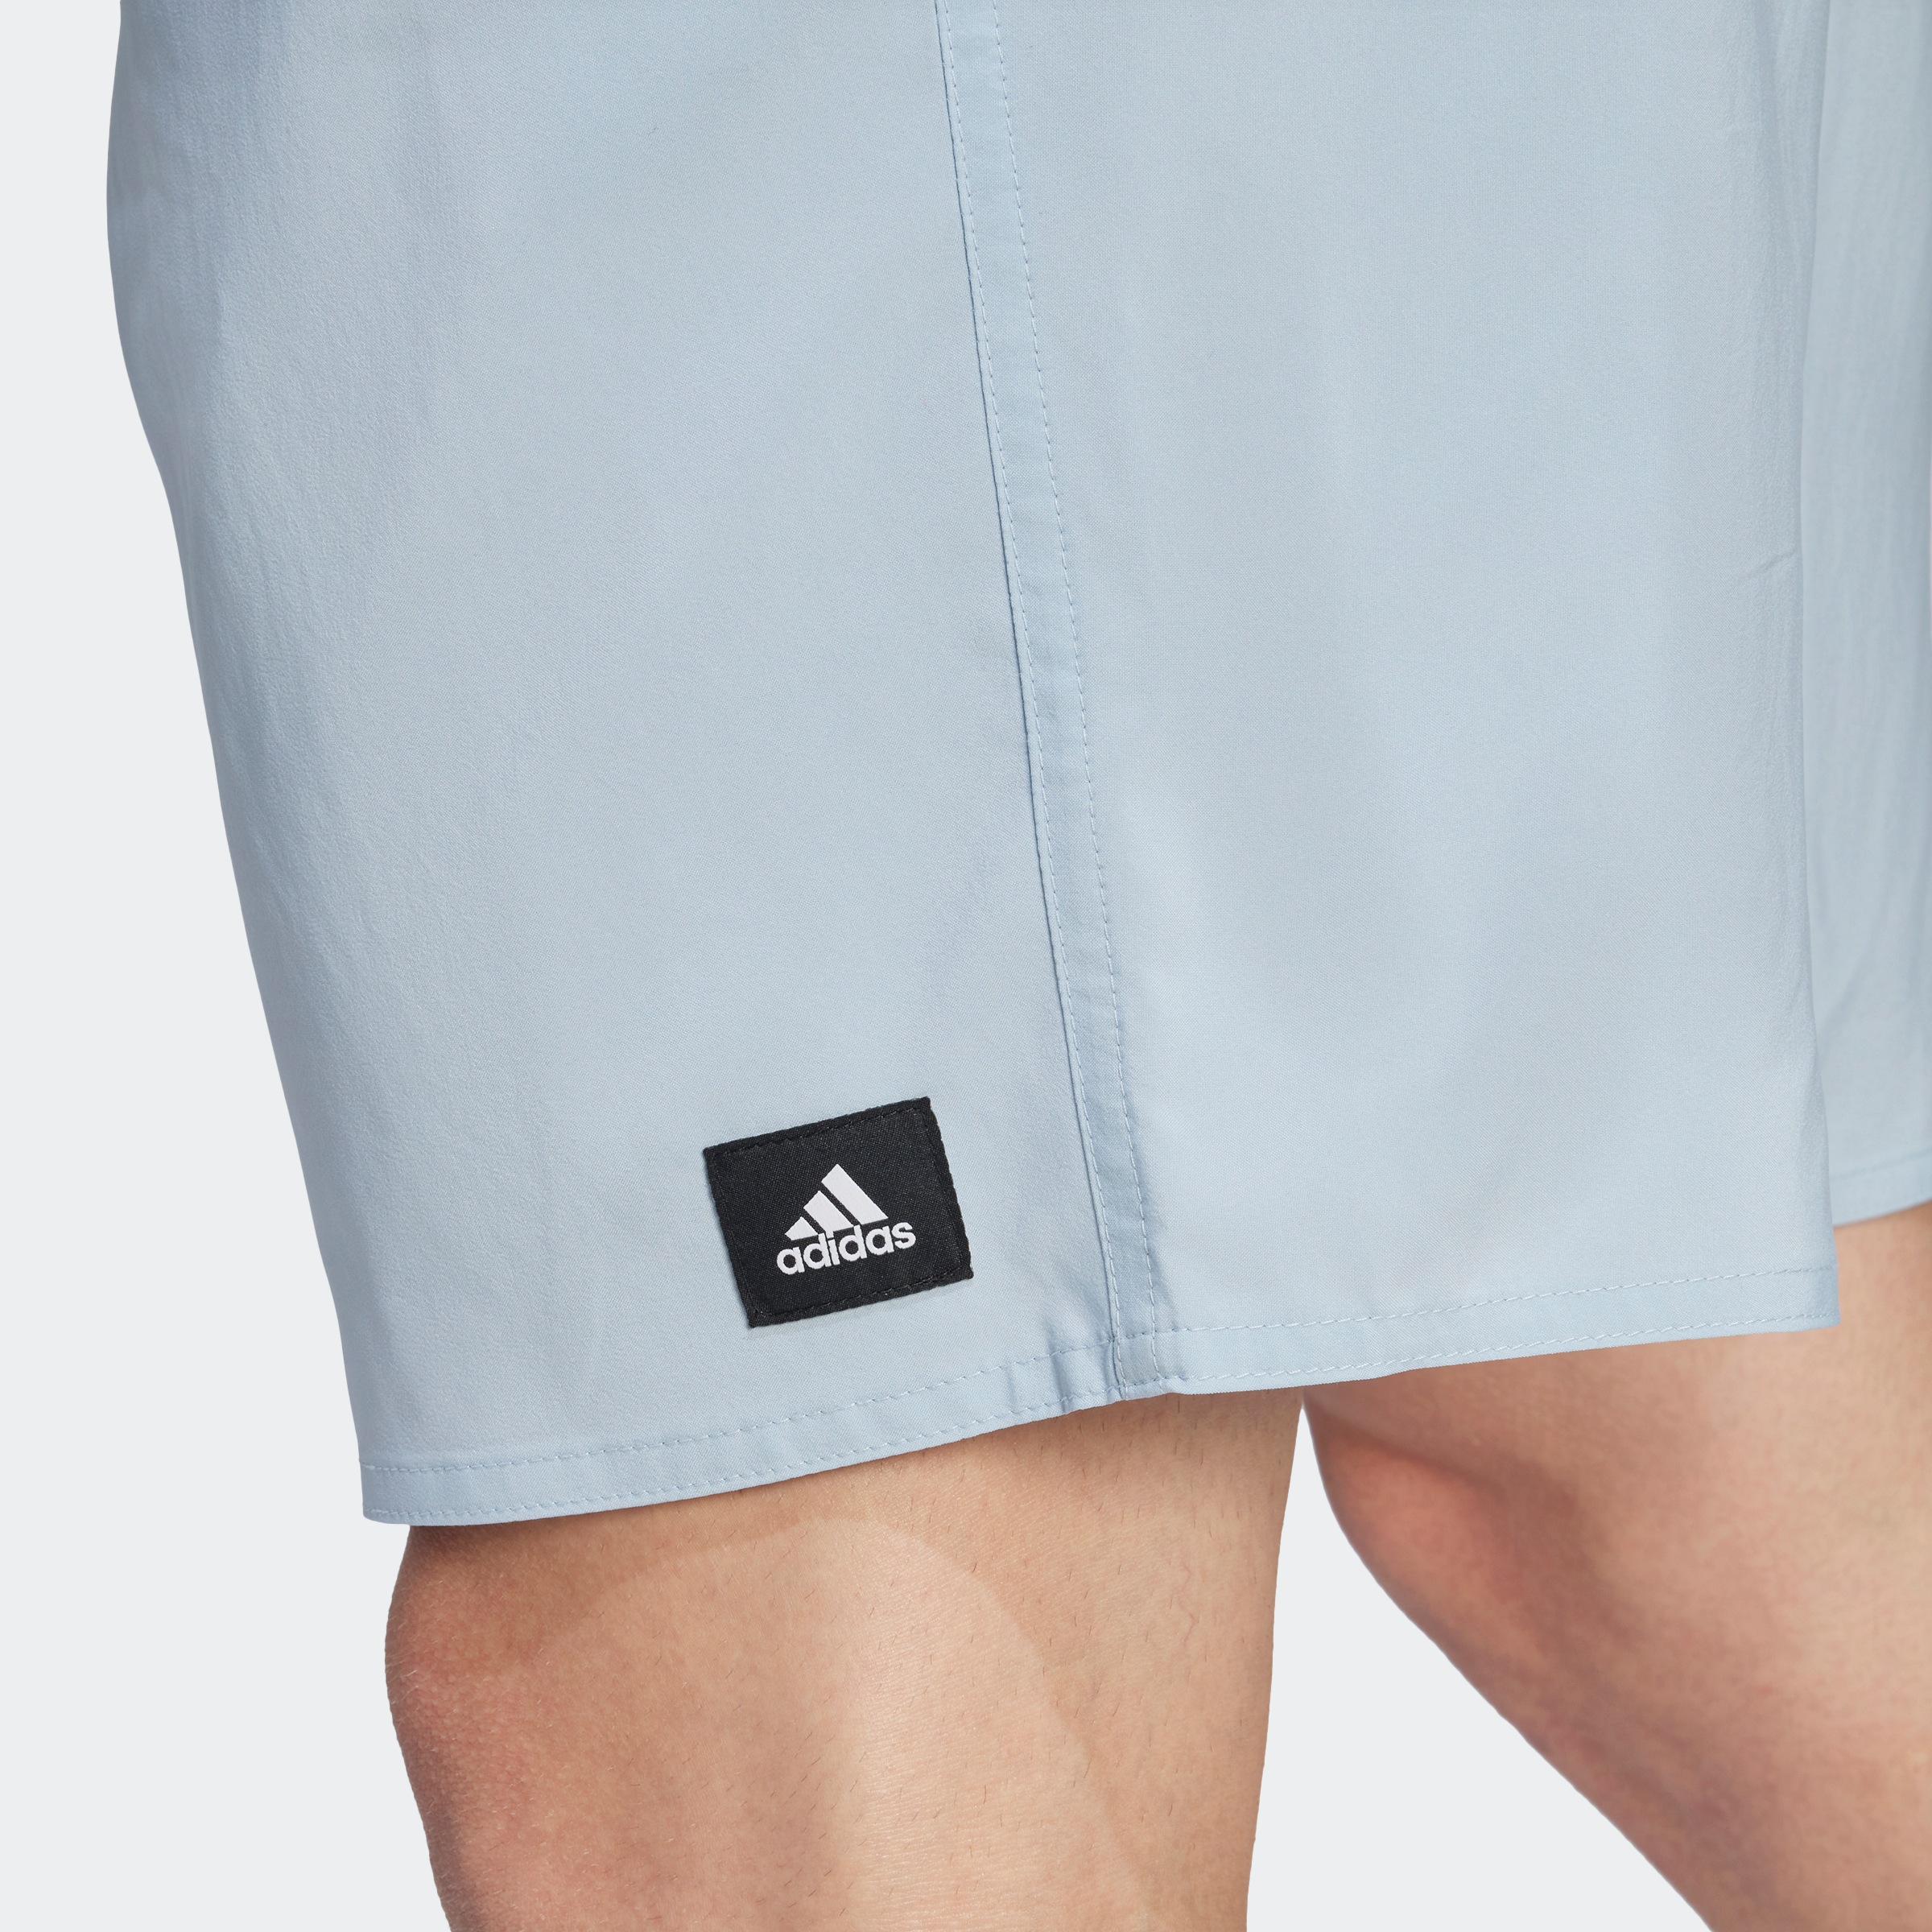 Shop Online CLASSICLENGTH«, (1 St.) adidas OTTO »SOLID CLX Badehose im Performance